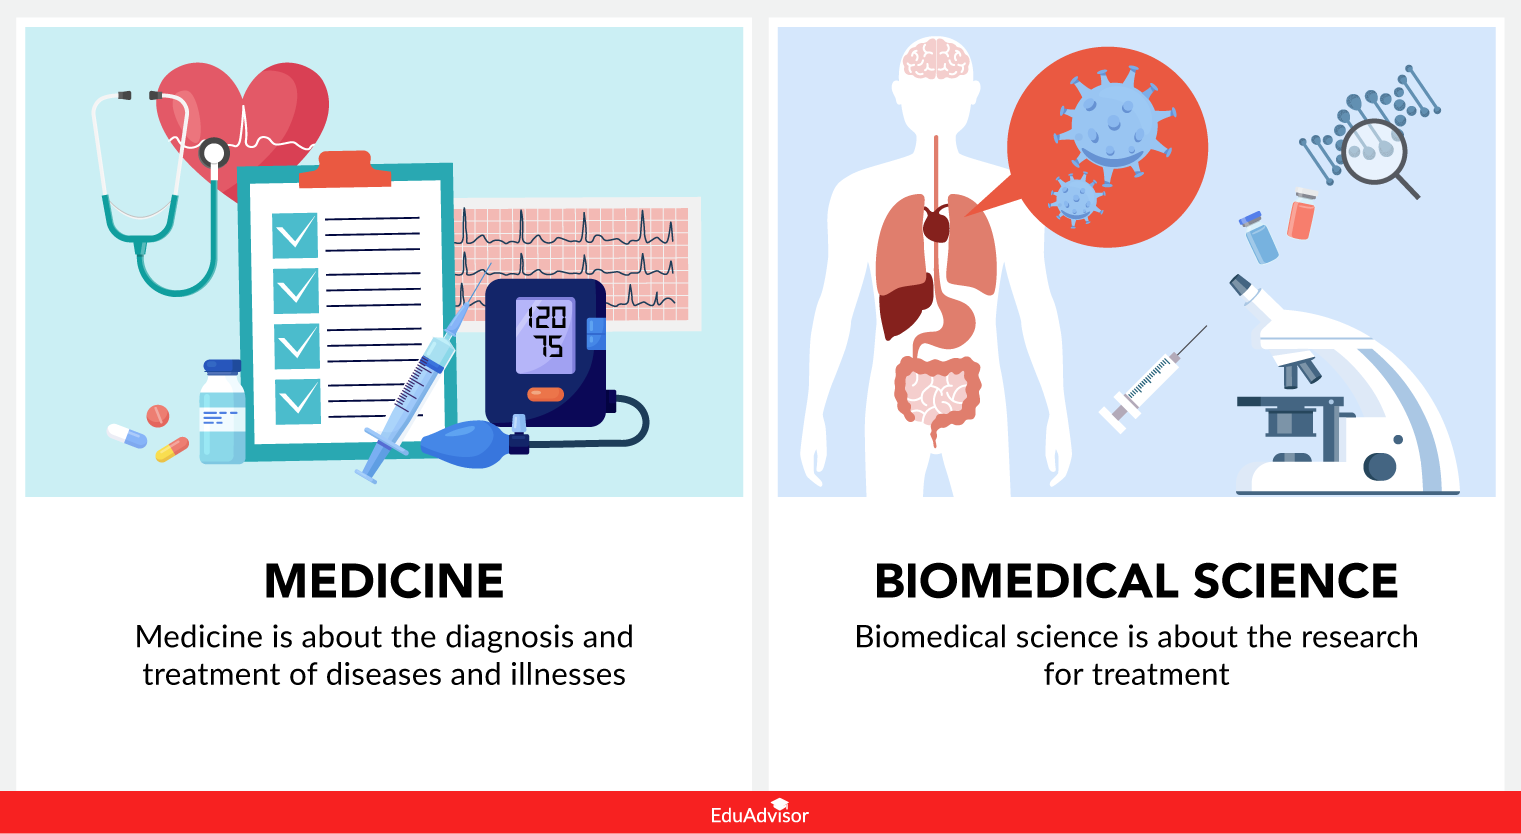 Medicine vs Biomedical Science What’s the Difference?